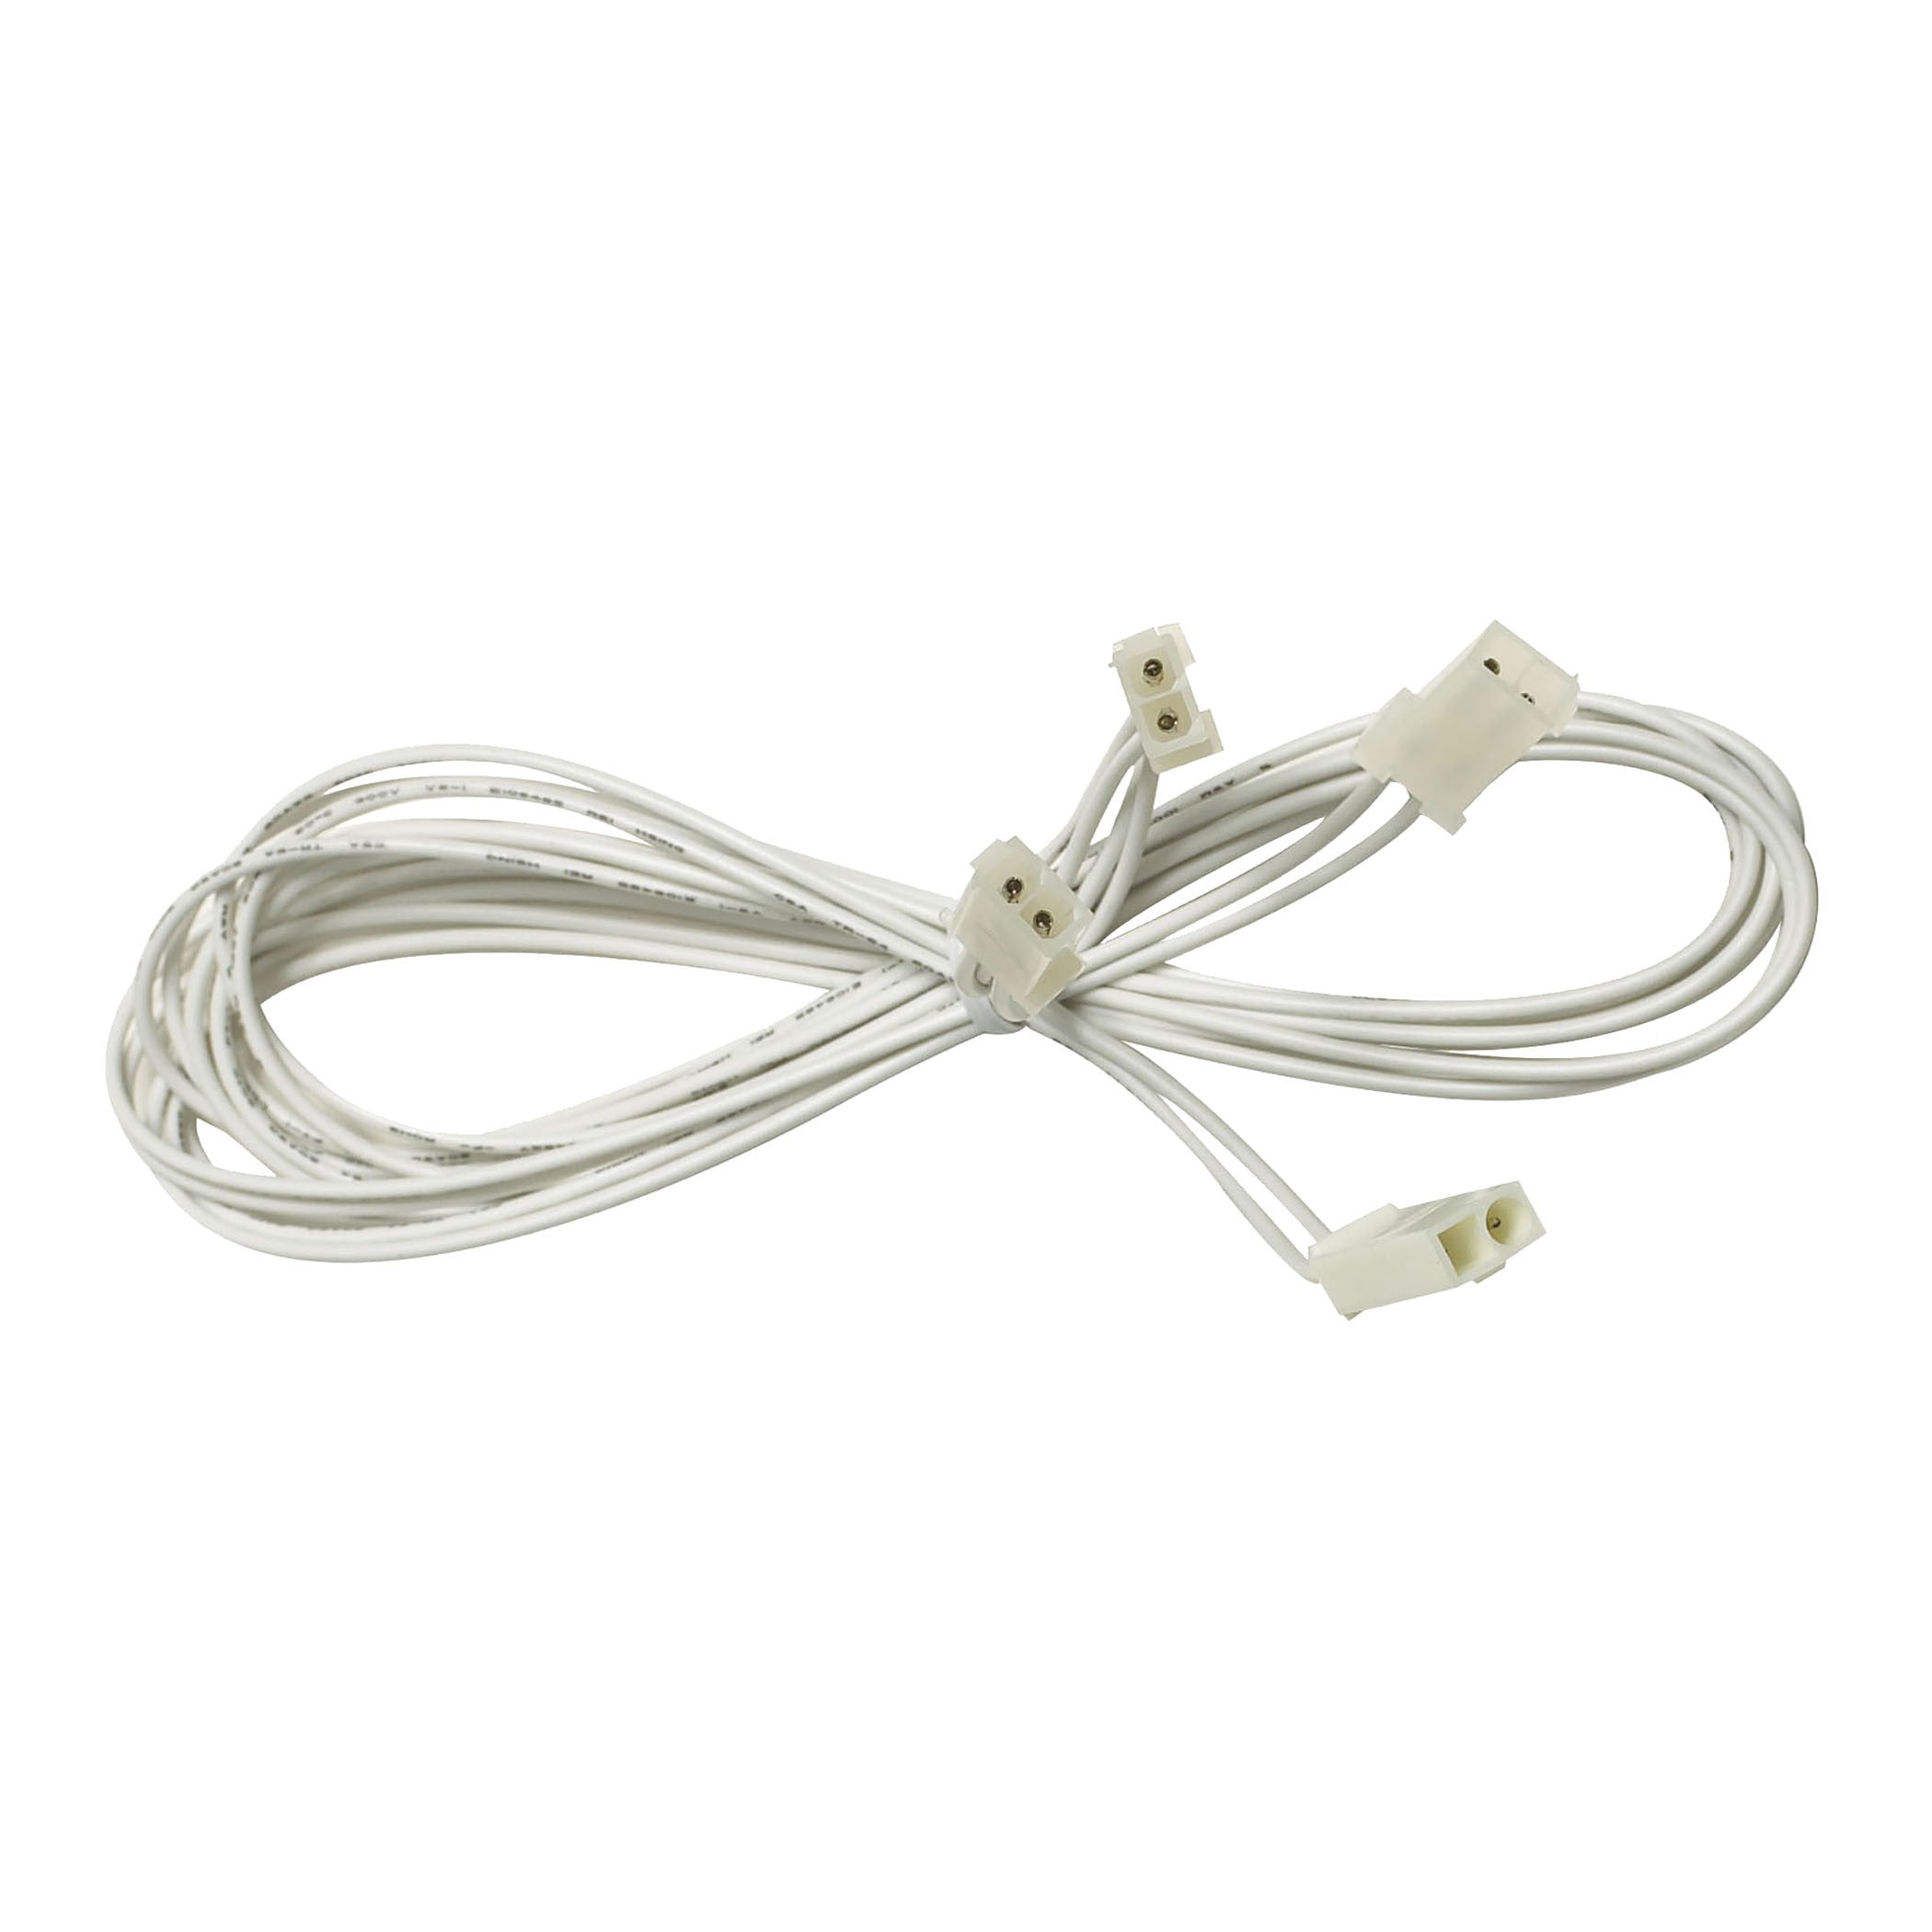 Alico Ac2a10 5-foot Harness With 41-inch Leads